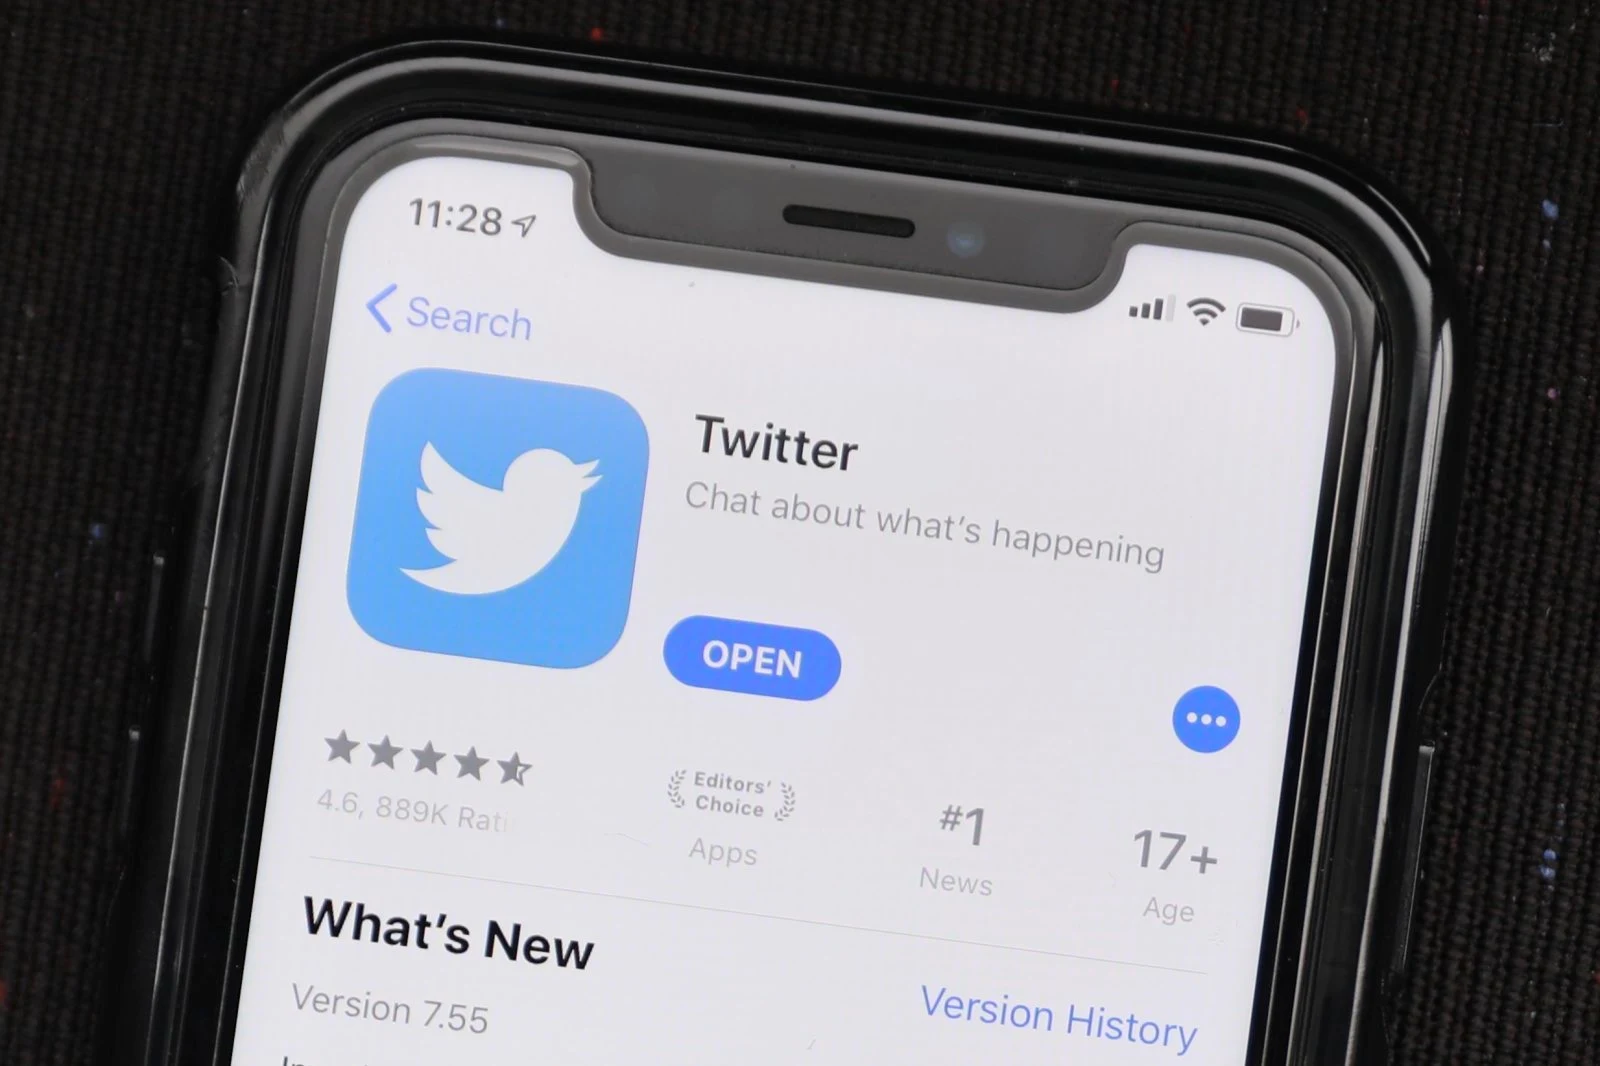 Twitter said in a blog post that, "We recently discovered that when you provided an email address or phone number for safety or security purposes (for example, two-factor authentication) this data may have inadvertently been used for advertising purposes, specifically in our Tailored Audiences and Partner Audiences advertising system."